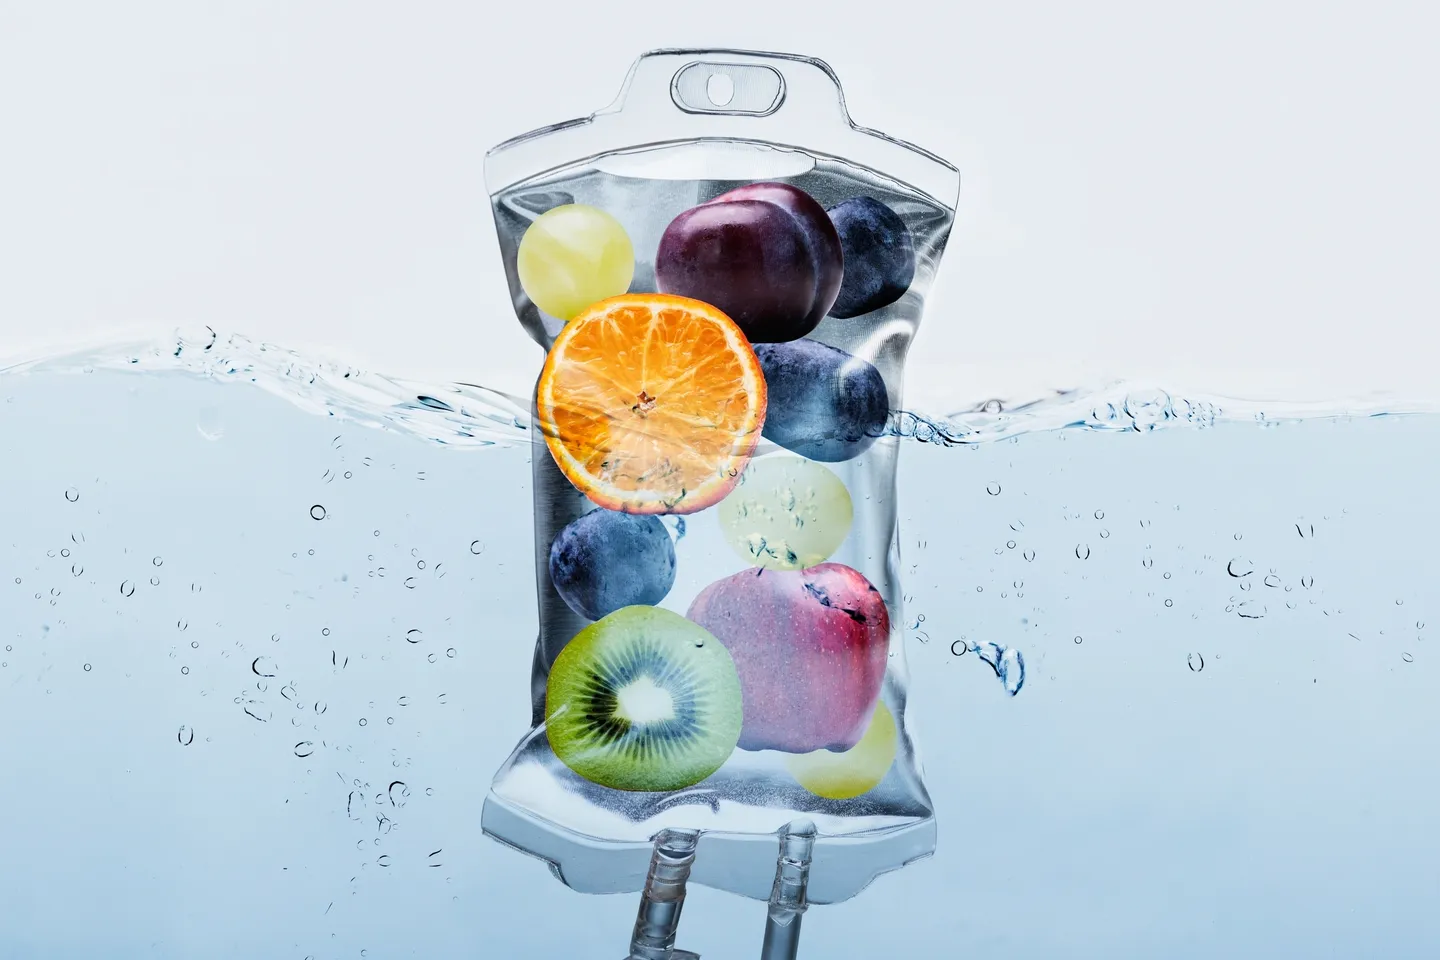 A bag of fruit is shown in the water.